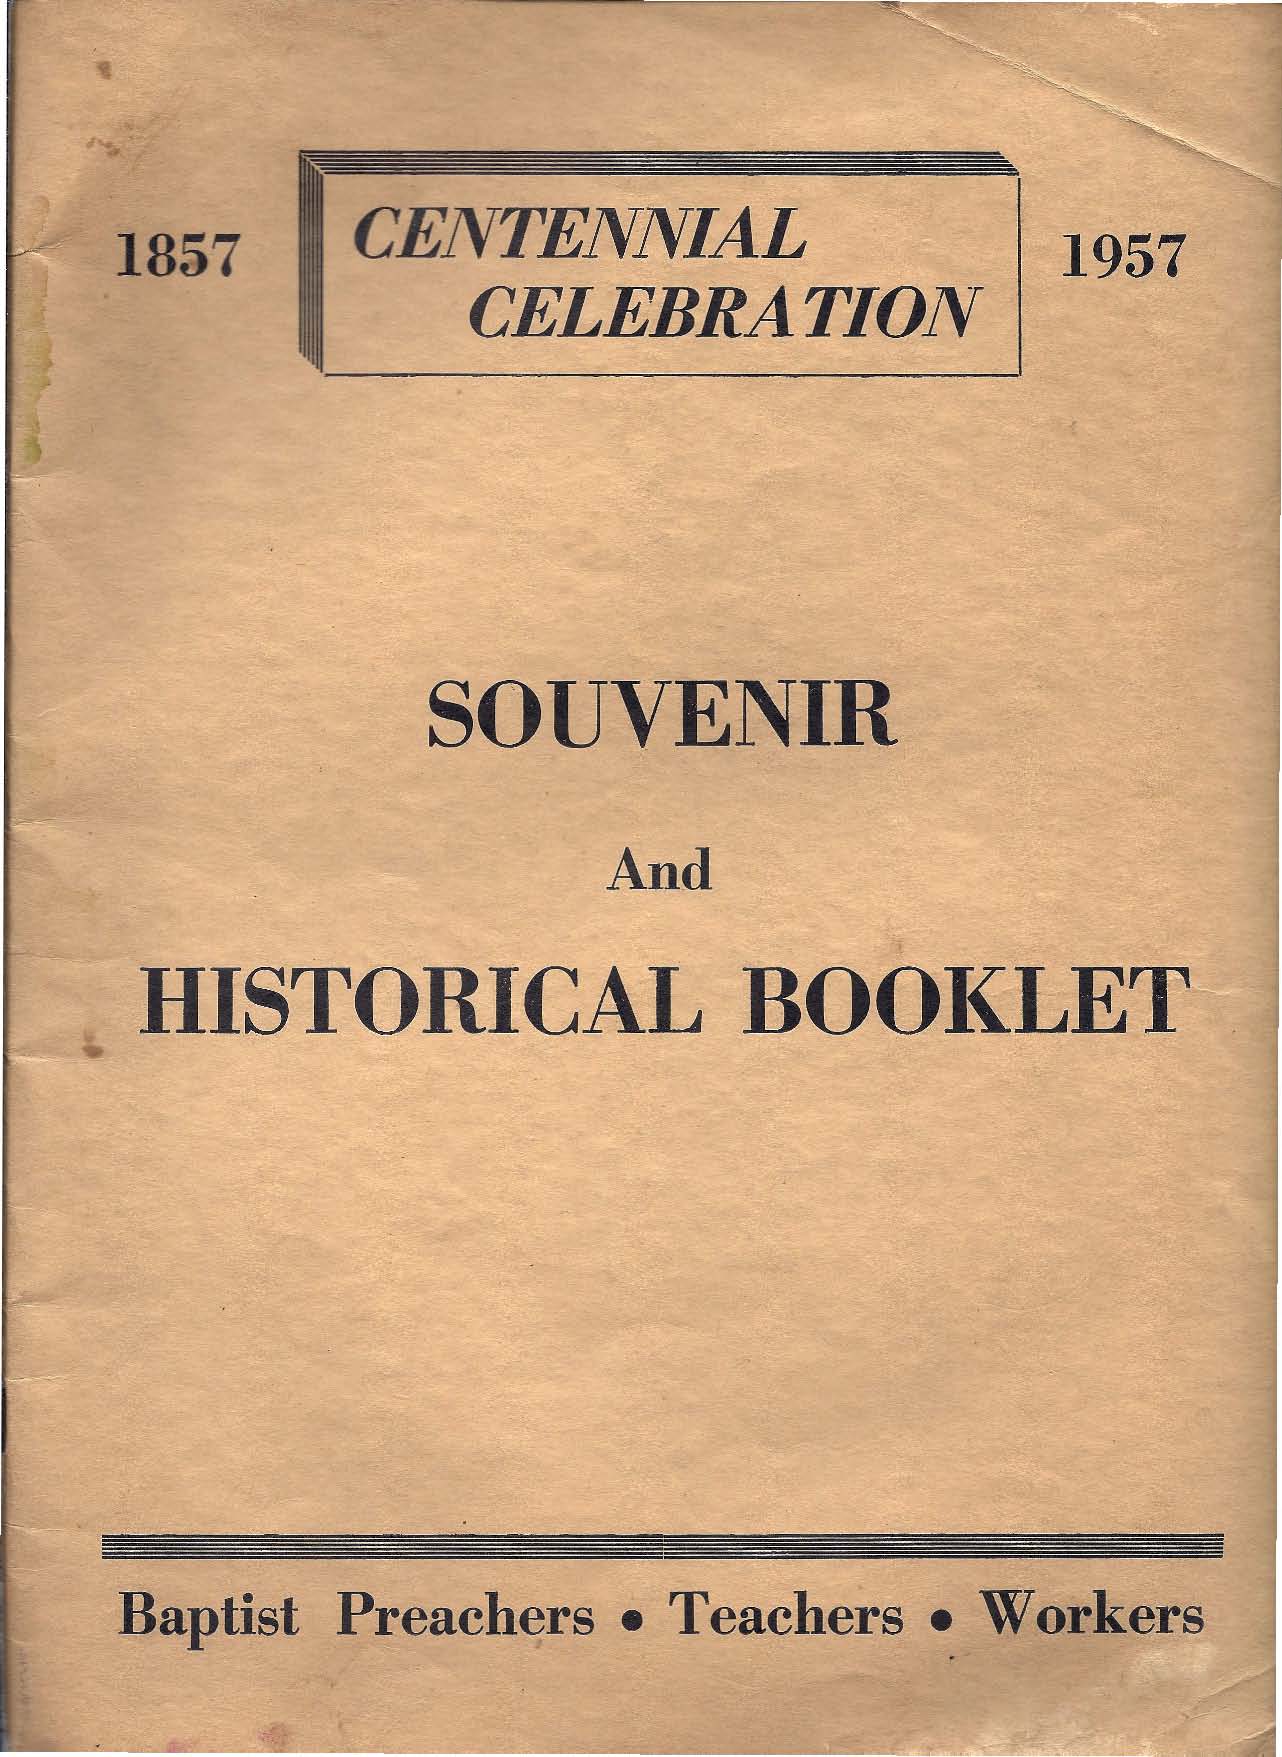 Centennial Celebration 1857-1957 Souvenir And Historical Booklet of Black Baptist Churches in Indiana 